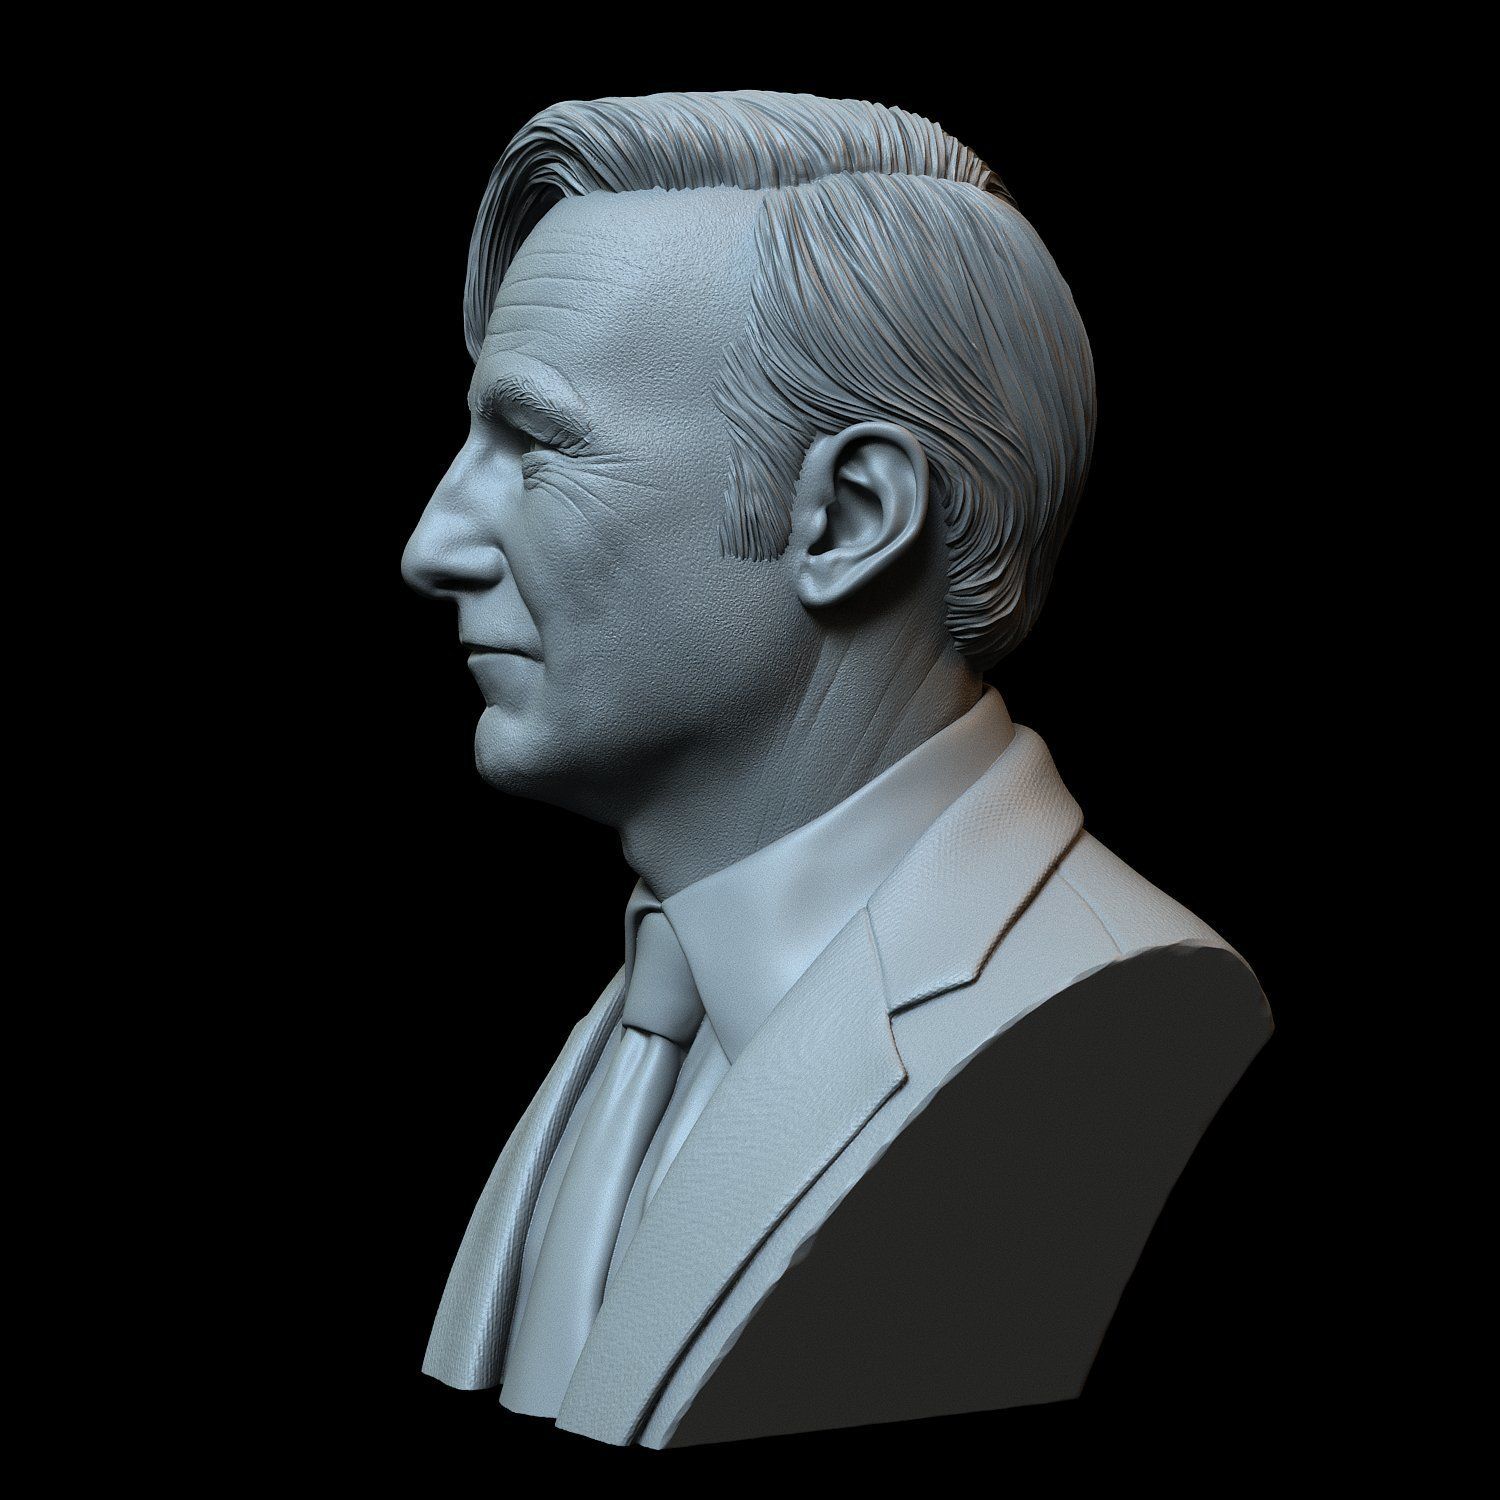 Saul06.jpg Download file Saul Goodman aka Jimmy McGill (Bob Odenkirk) from Breaking Bad and Better Call Saul • 3D printing template, sidnaique